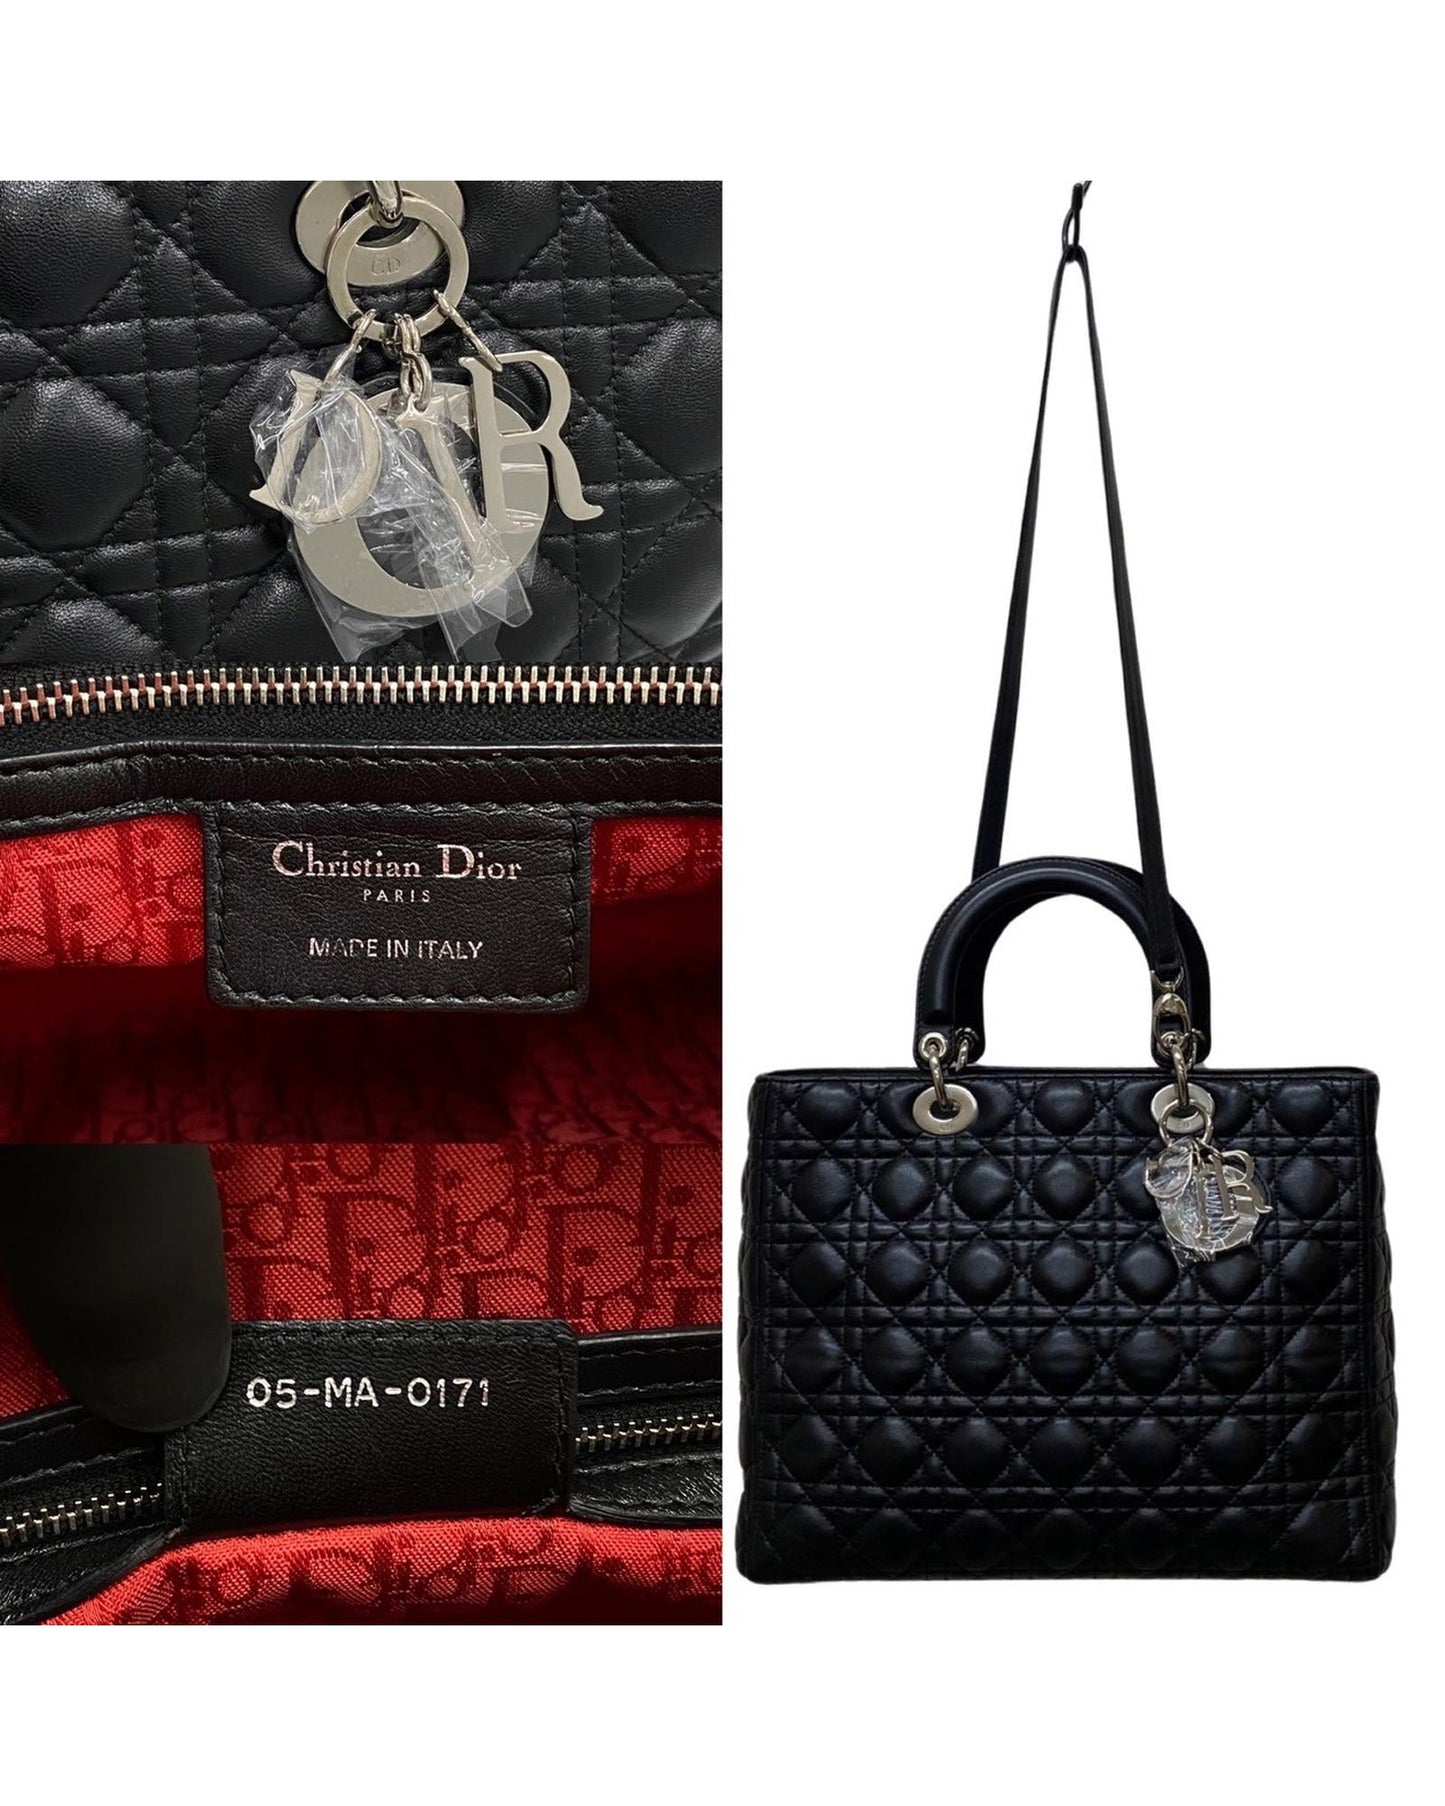 Dior Women's Large Cannage Leather Lady Dior Bag in Excellent Condition in Black